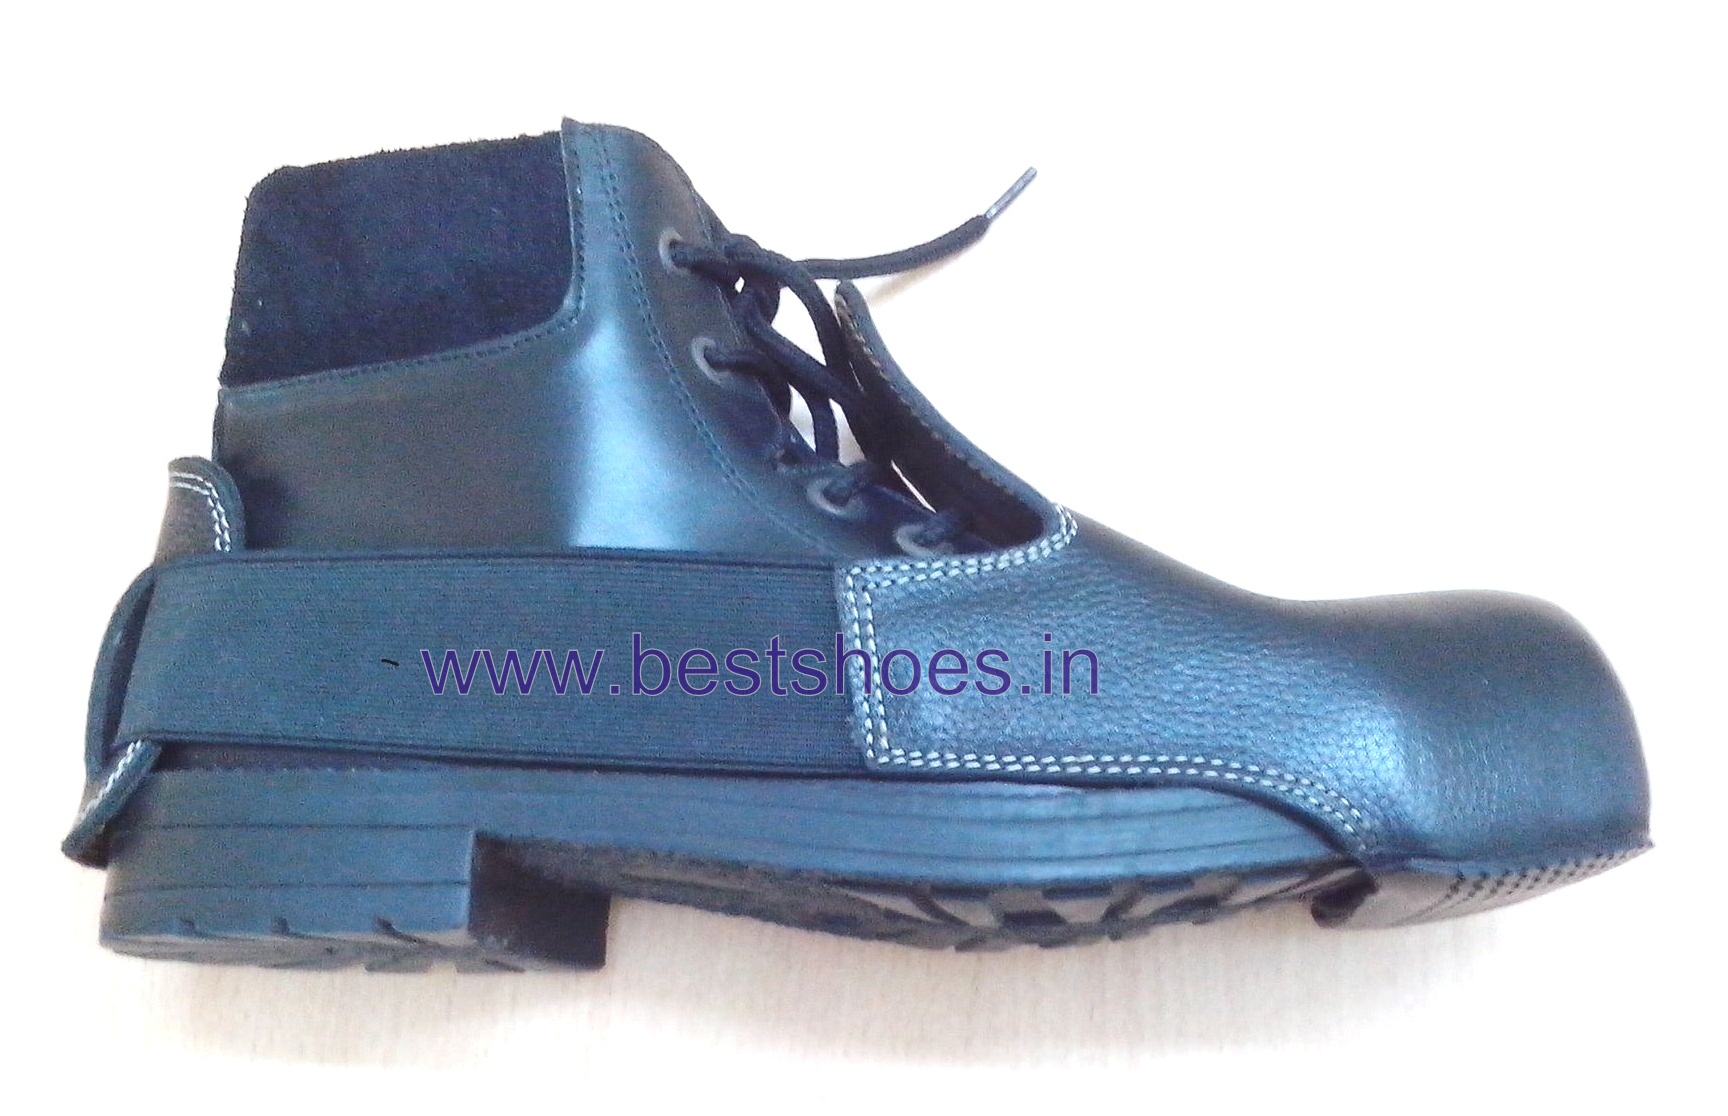 steel toe protective shoe covers